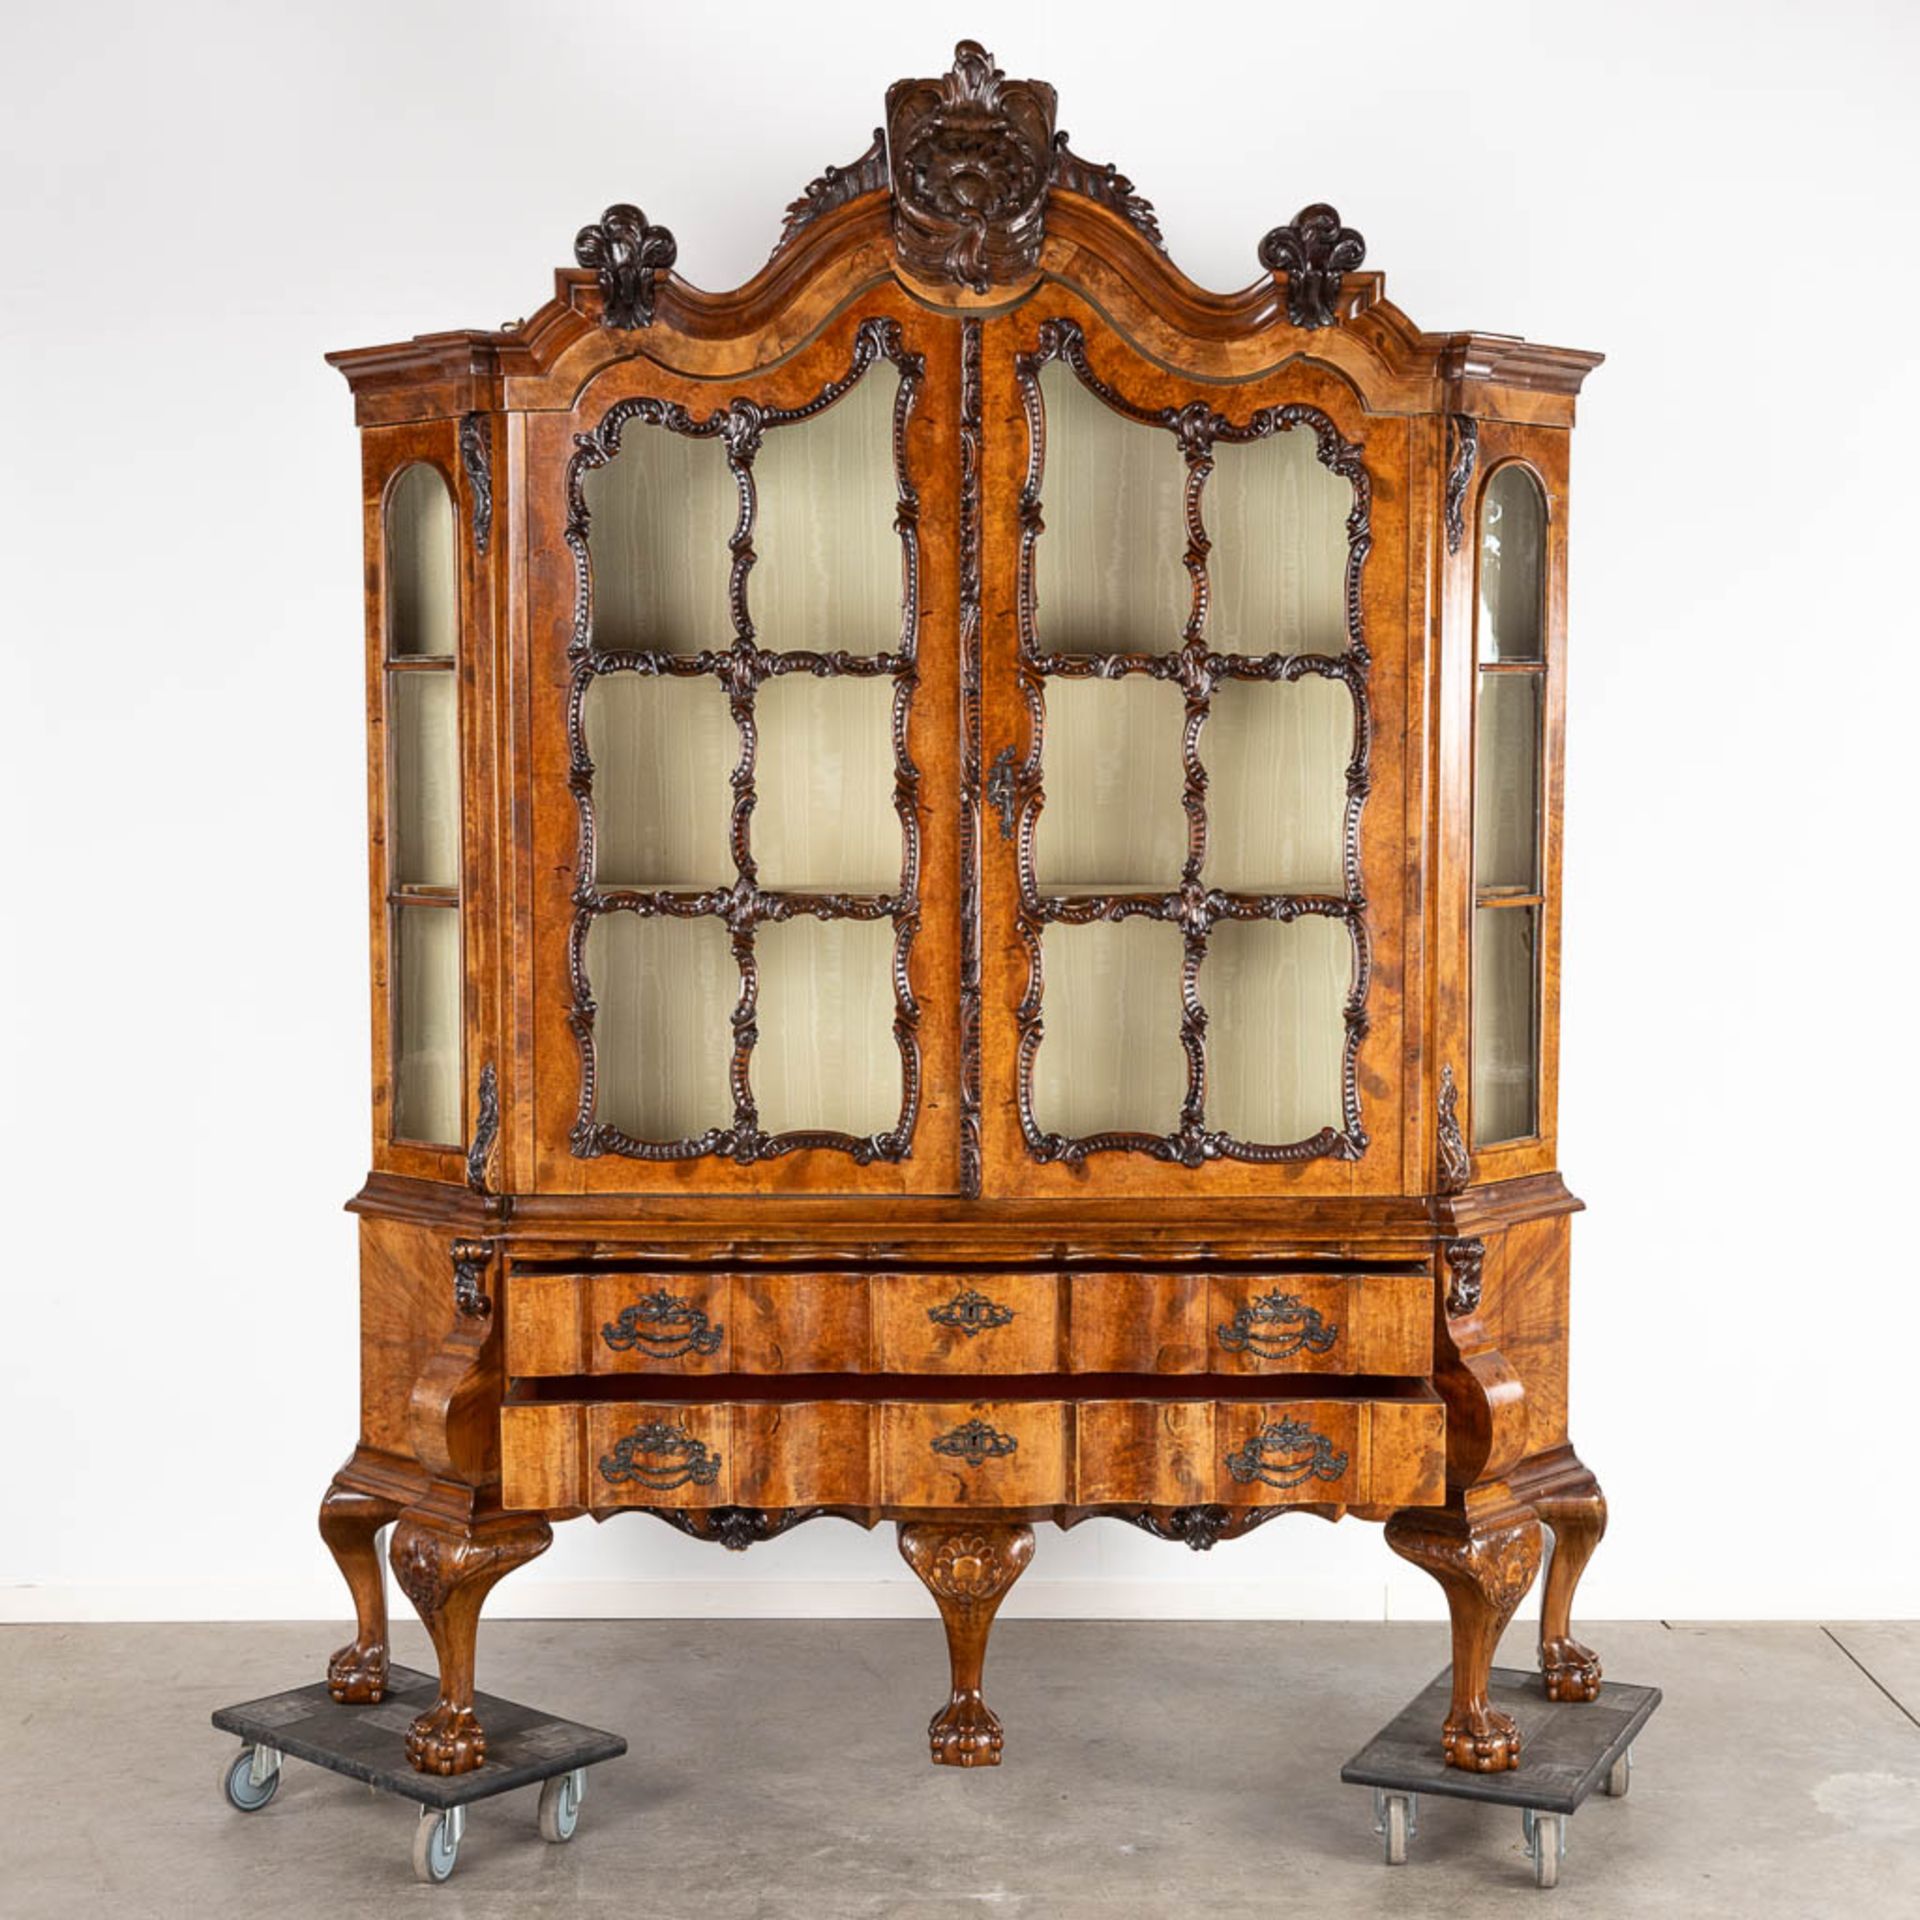 A large display cabinet, England, Chippendale style. 19th C. (D:53 x W:208 x H:252 cm) - Image 4 of 20